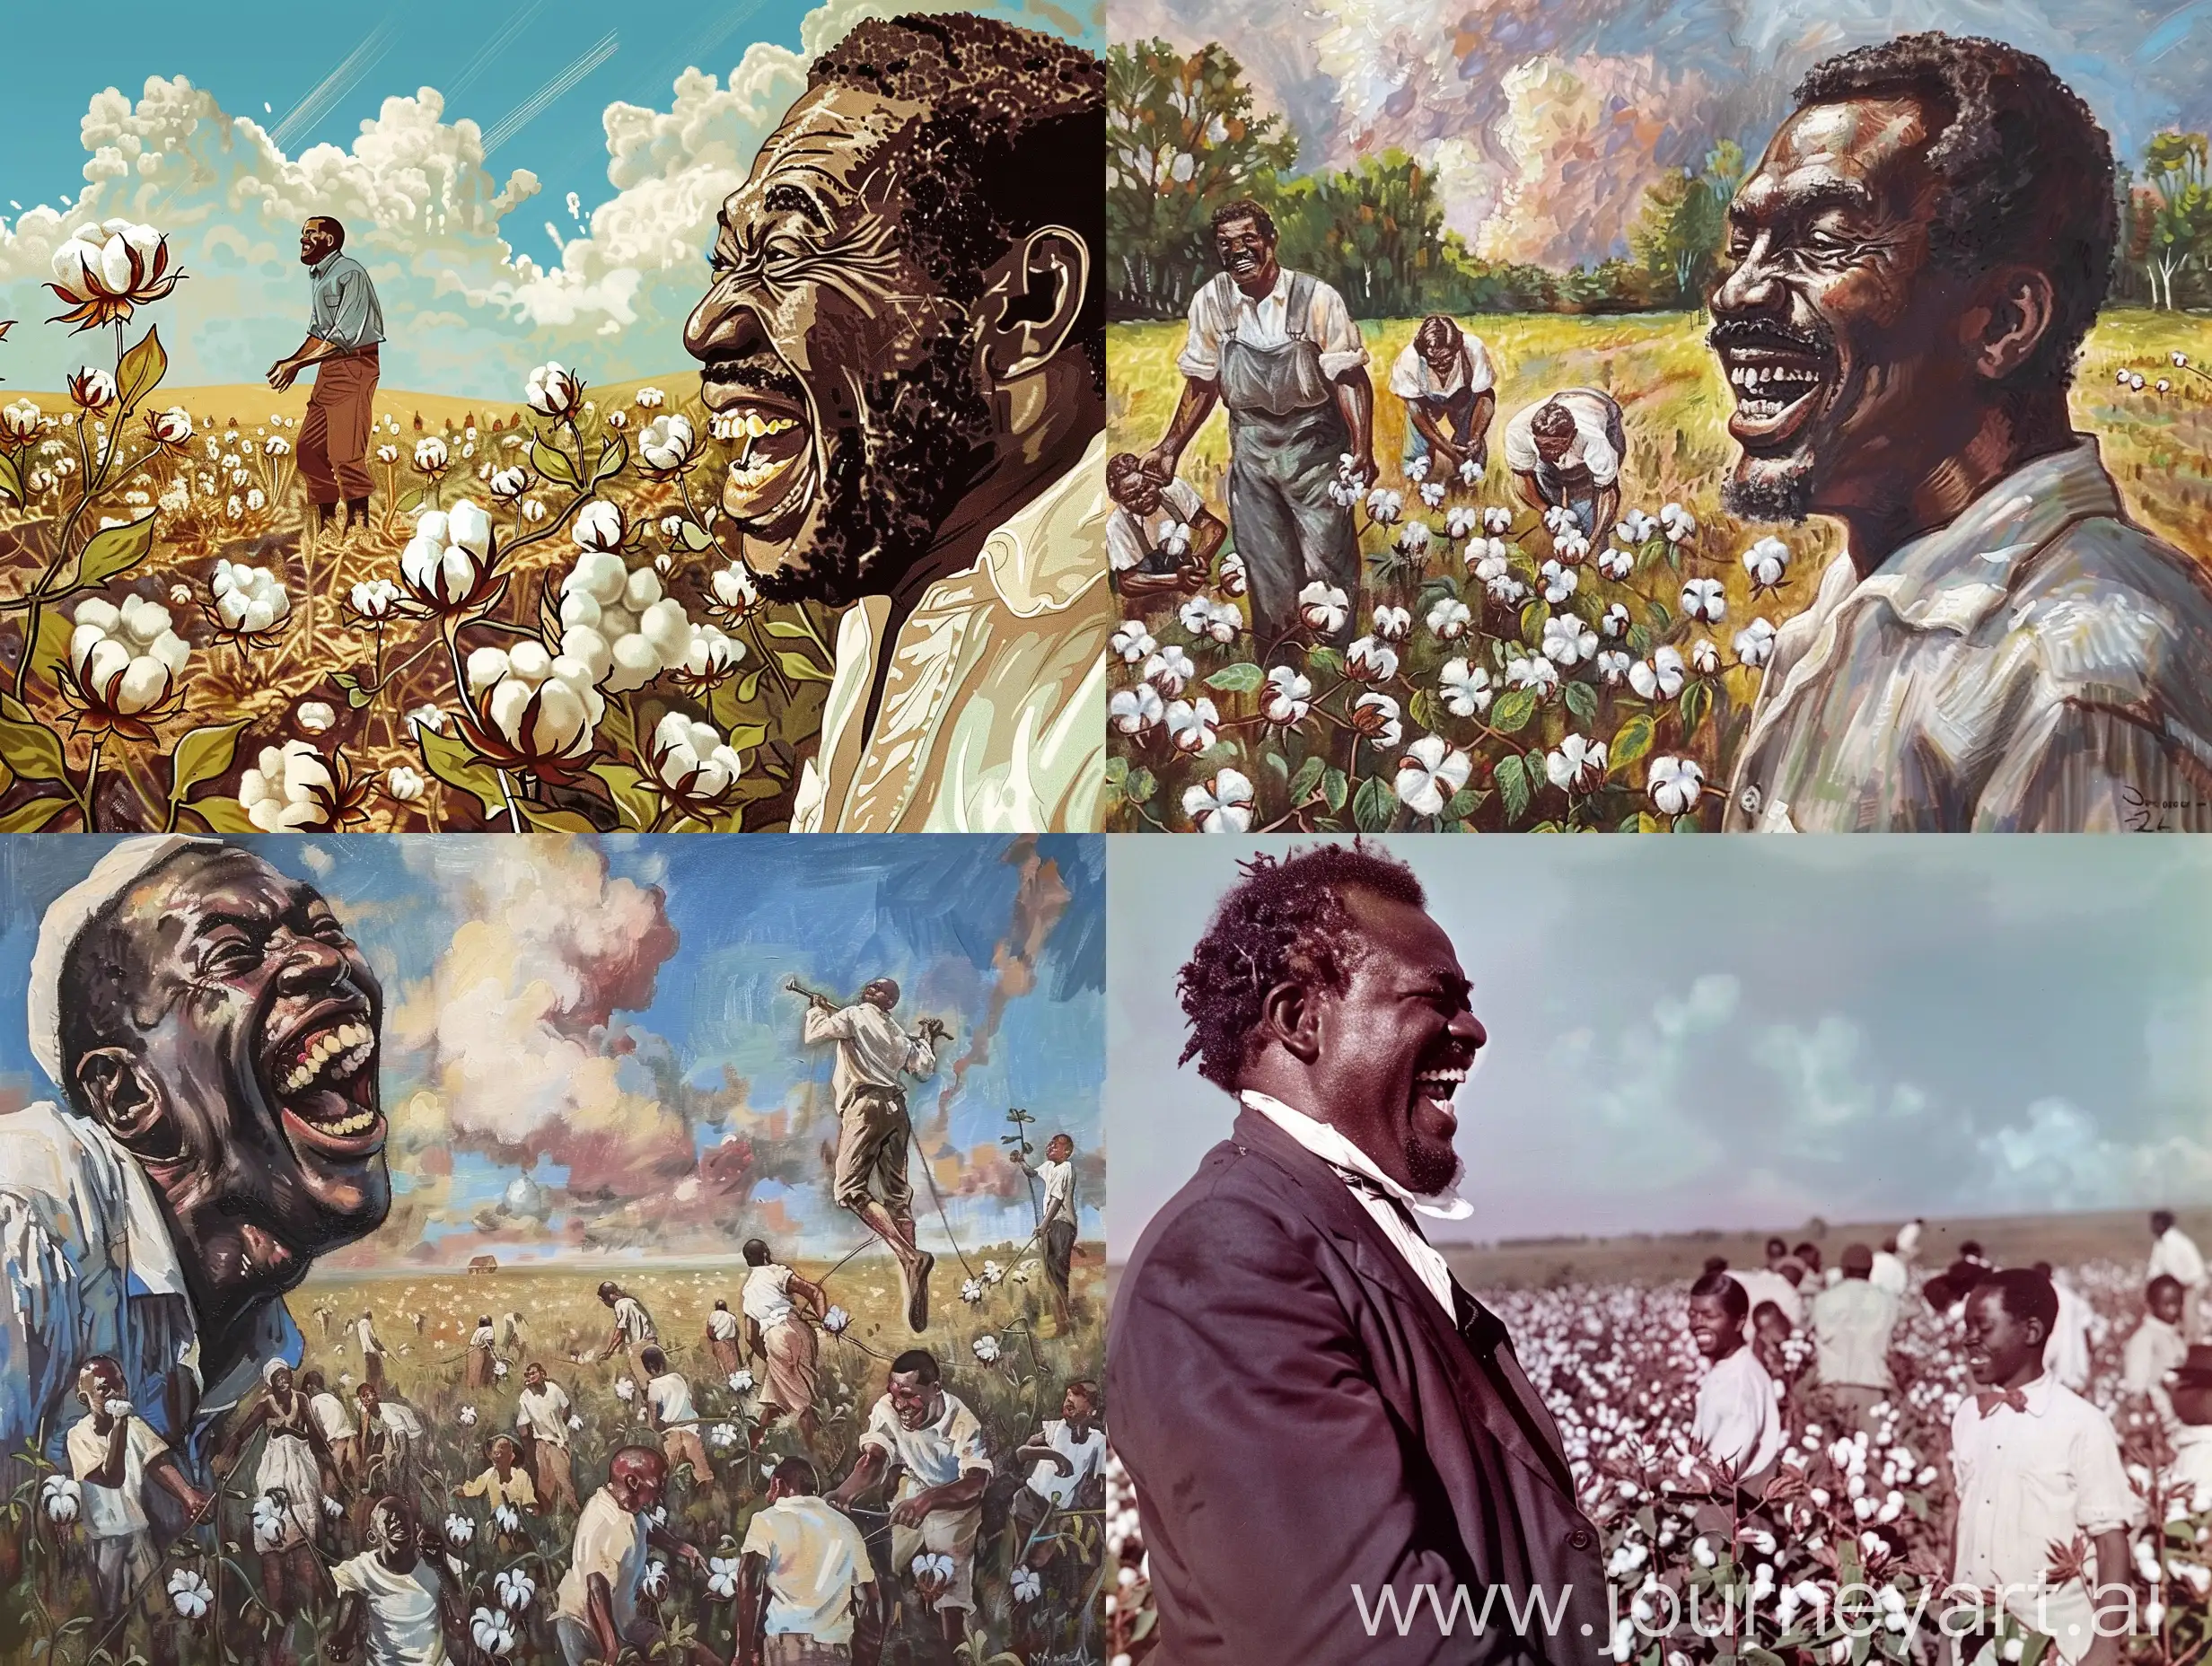 Affluent-Black-Man-Laughs-at-White-Cotton-Pickers-in-Field